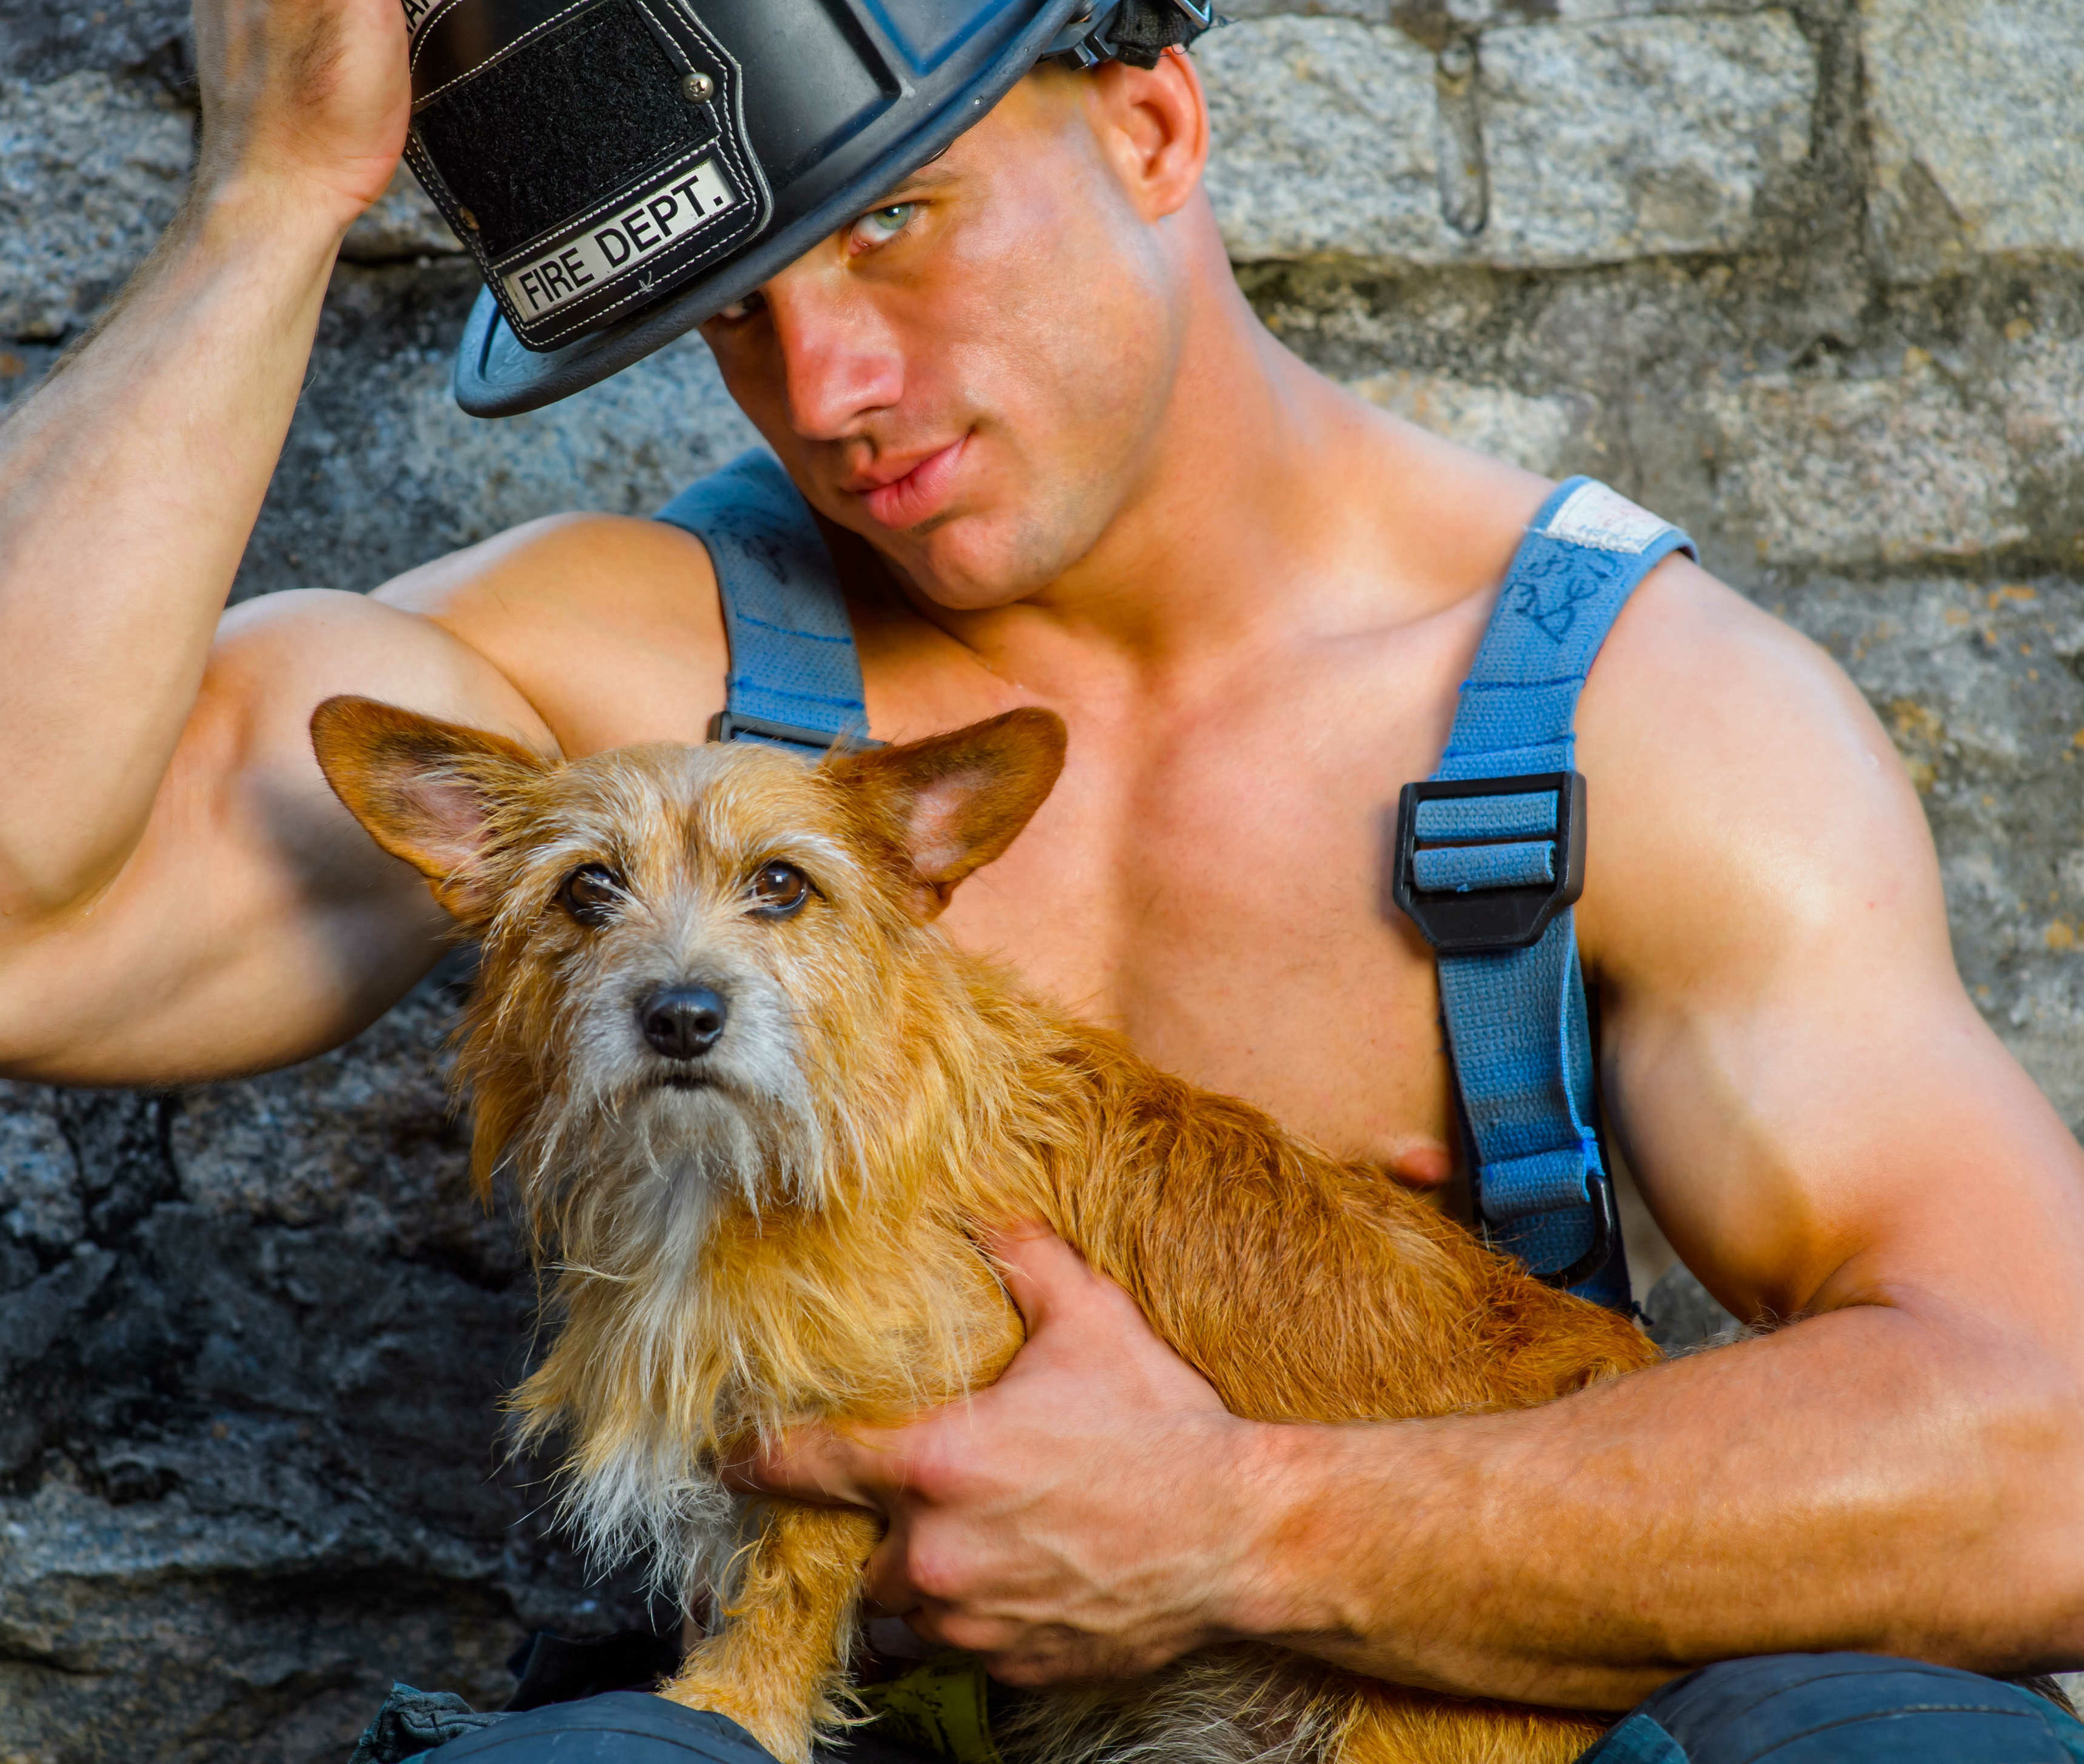 Save an animal's life this holiday season! Purchase the 2015 Firefighter Calendar for you and your loved ones. All proceeds provide the medical care to treat injured, abused and abandoned animals.